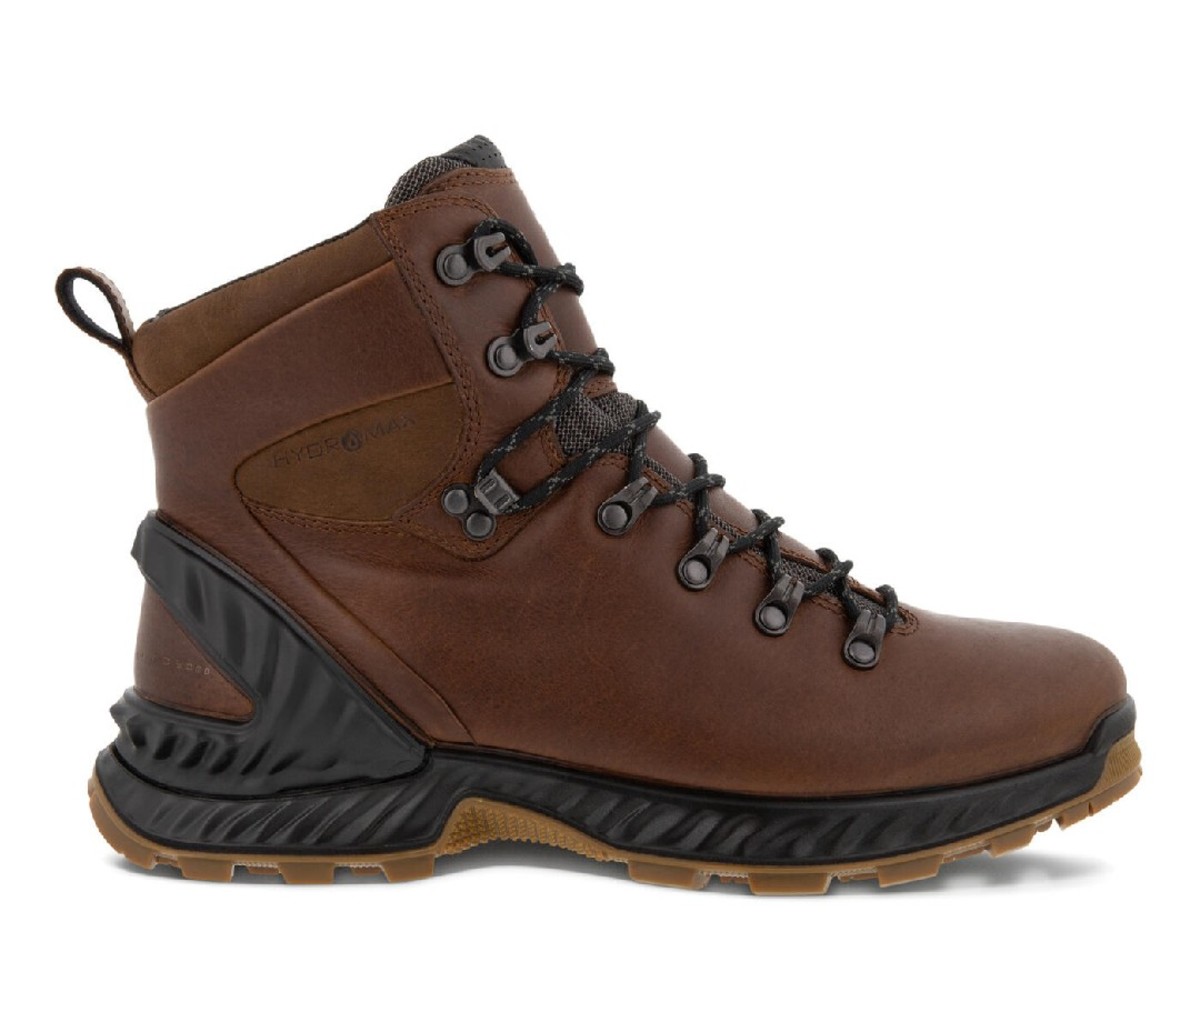 Ecco ExoHike Retro Hiker Boots: Sustainable Gift Guide